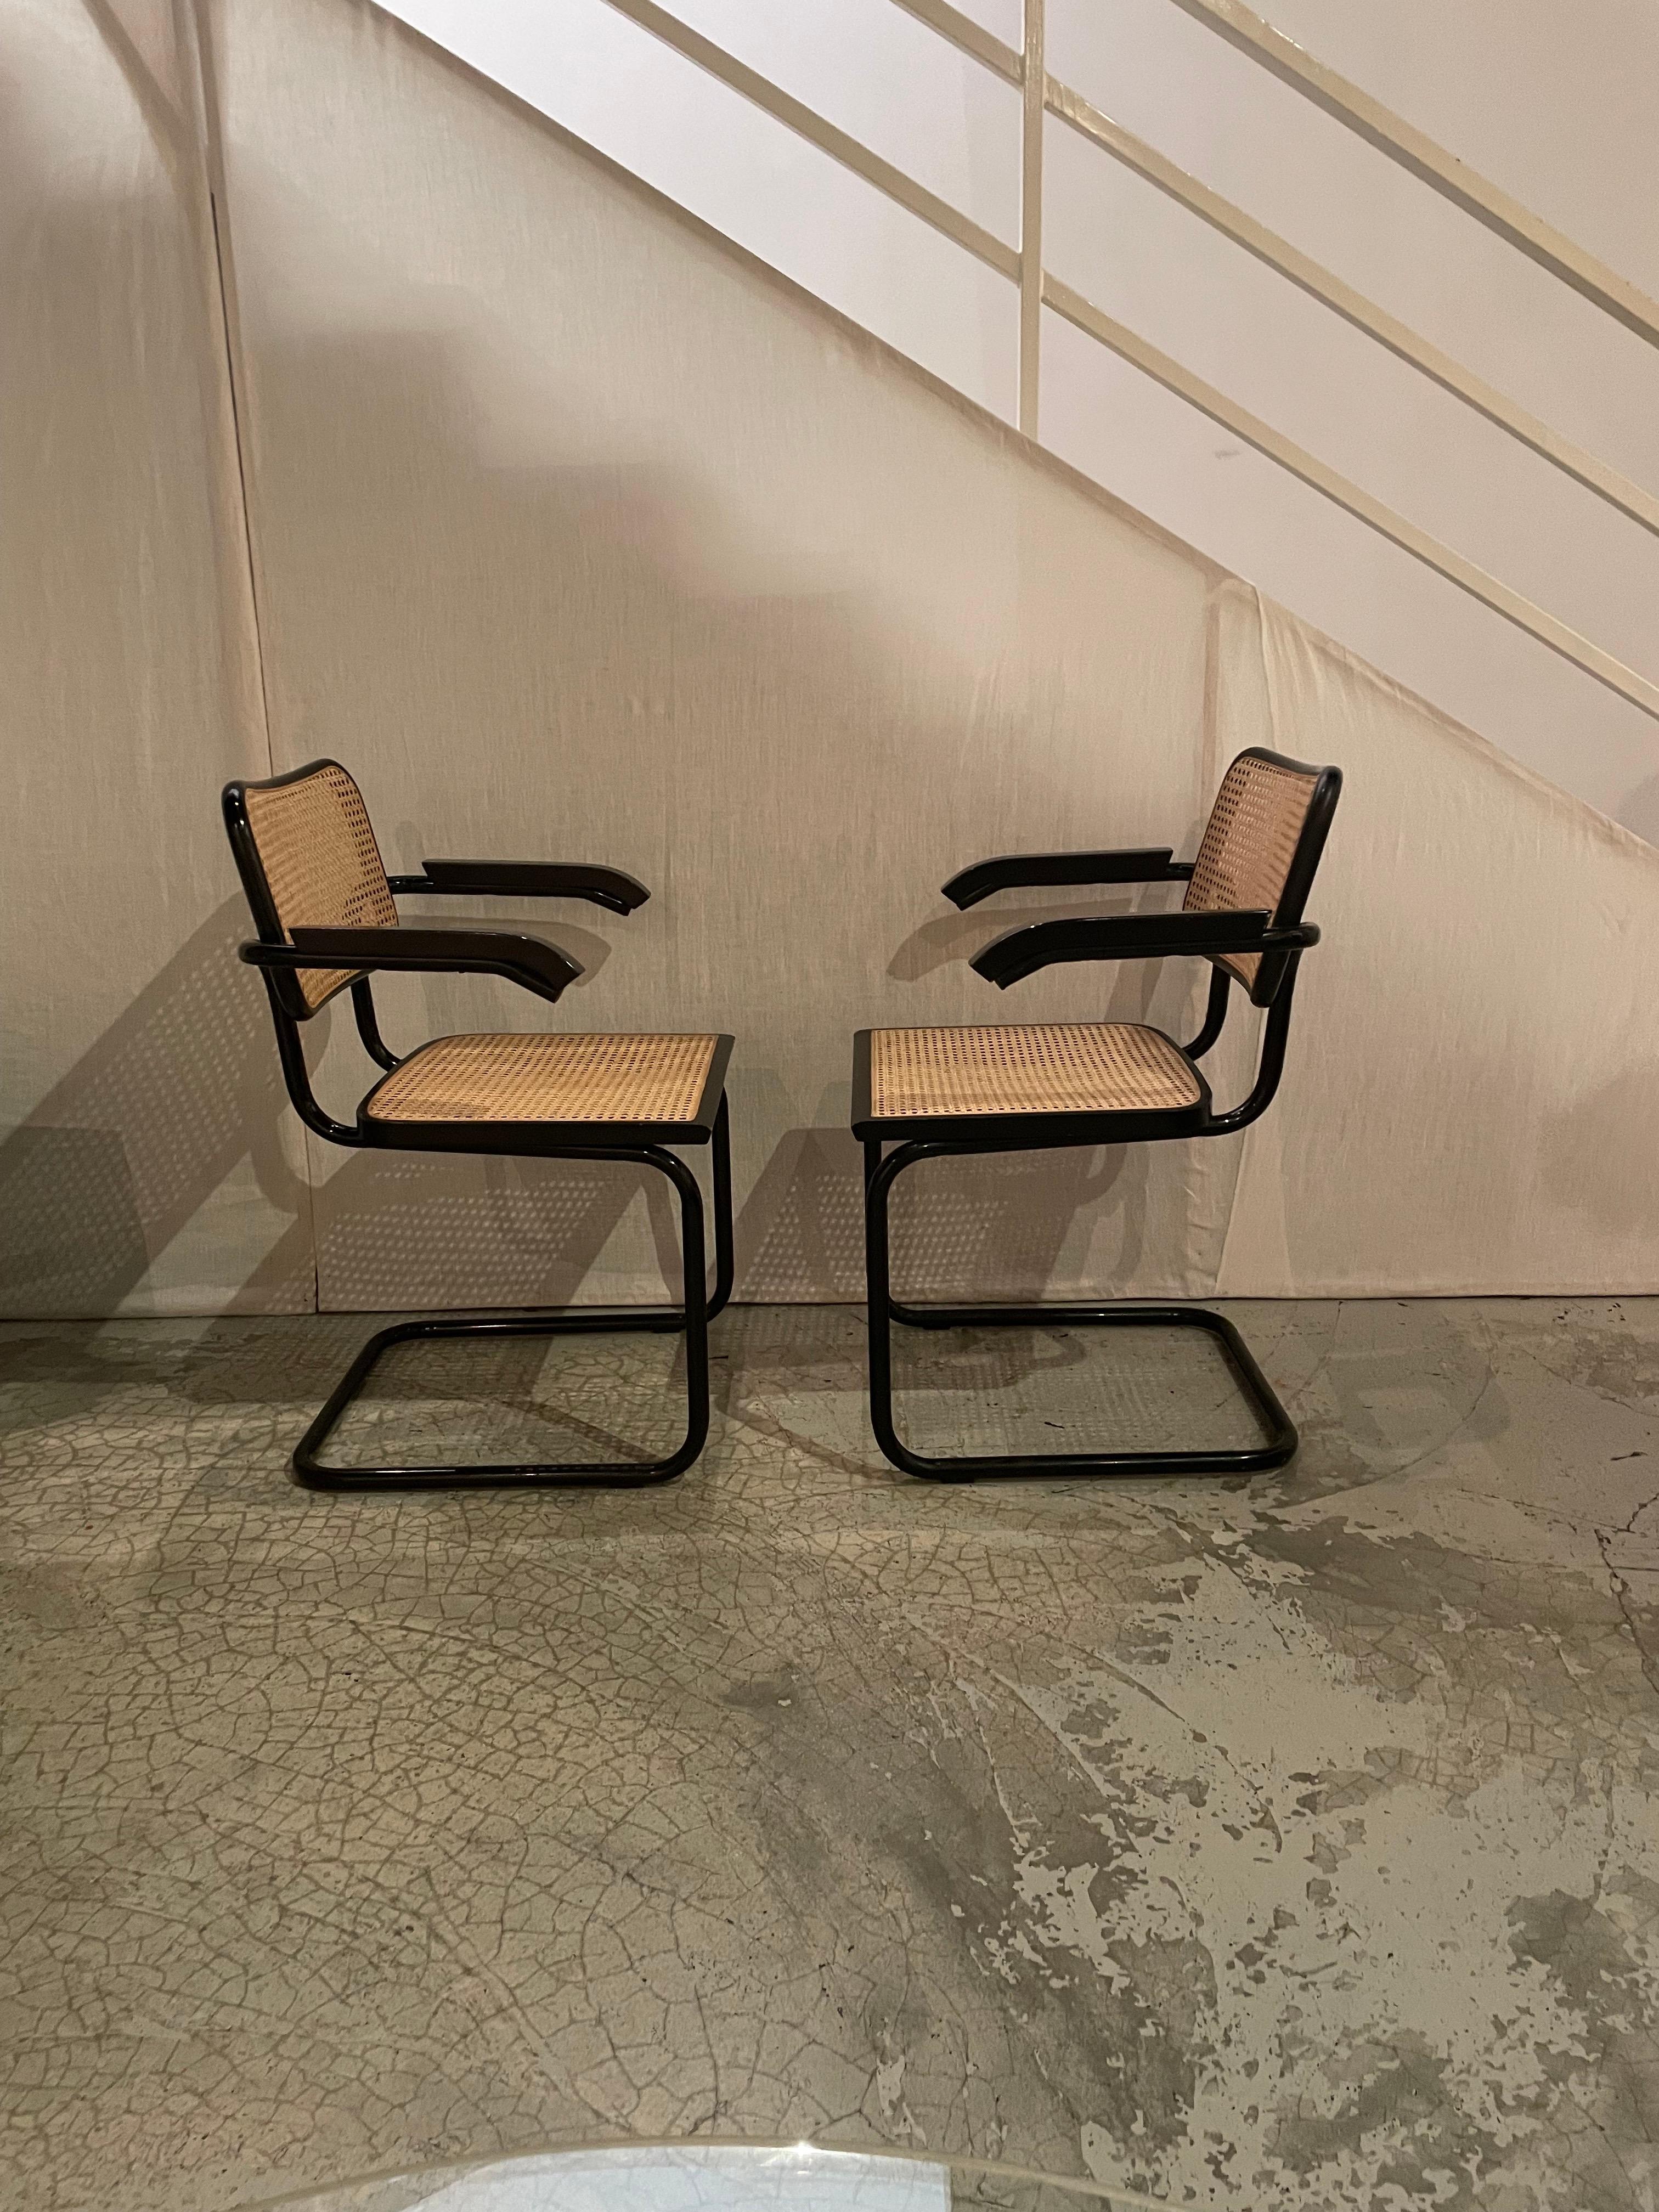 Pair of Cesca B32 chairs by Marcel Breuer 1970s. An icon of the modernist movement, Marcel Breuer was a pioneering architect known for his use of steel, glass and cement. He created many iconic pieces such as the Wassily armchair, the Cesca chair